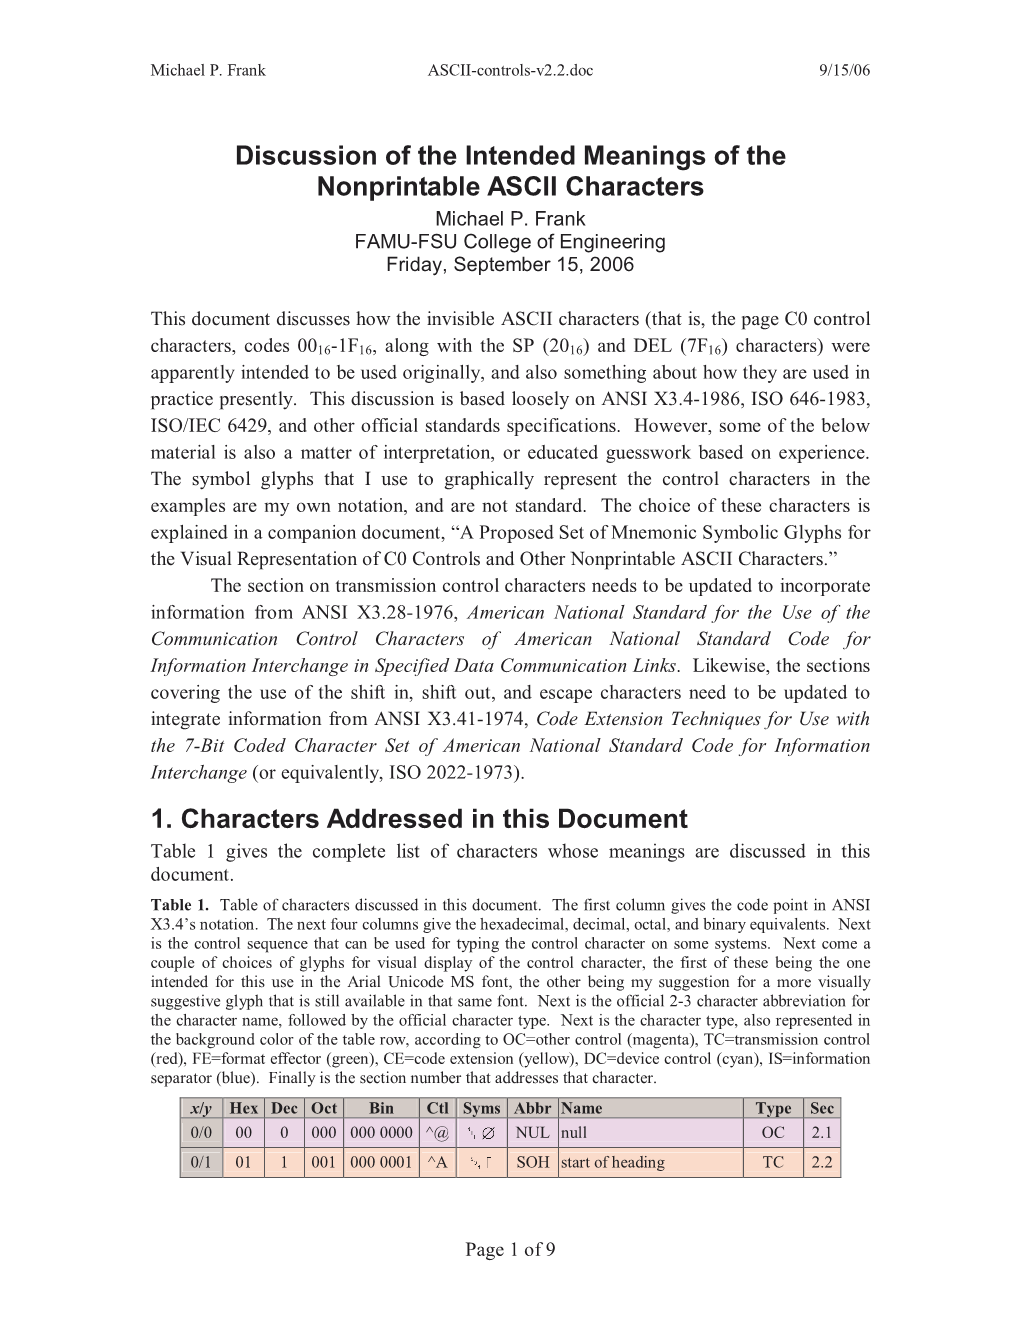 Discussion of the Intended Meanings of the Nonprintable ASCII Characters Michael P